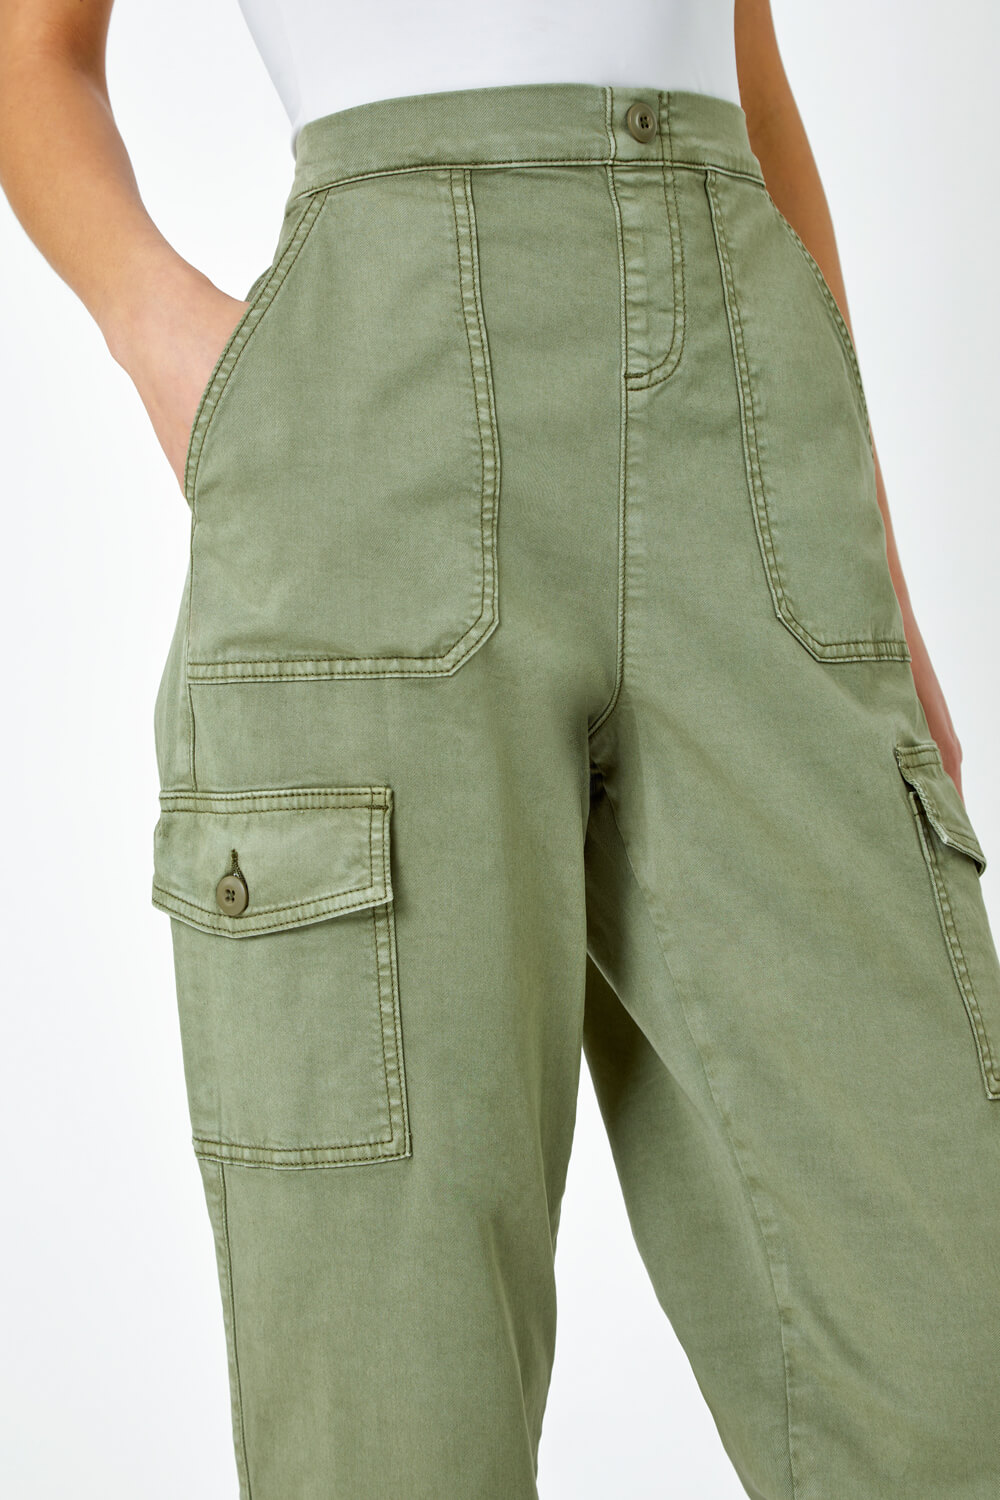 Sage Casual Cargo Stretch Trousers, Image 5 of 7